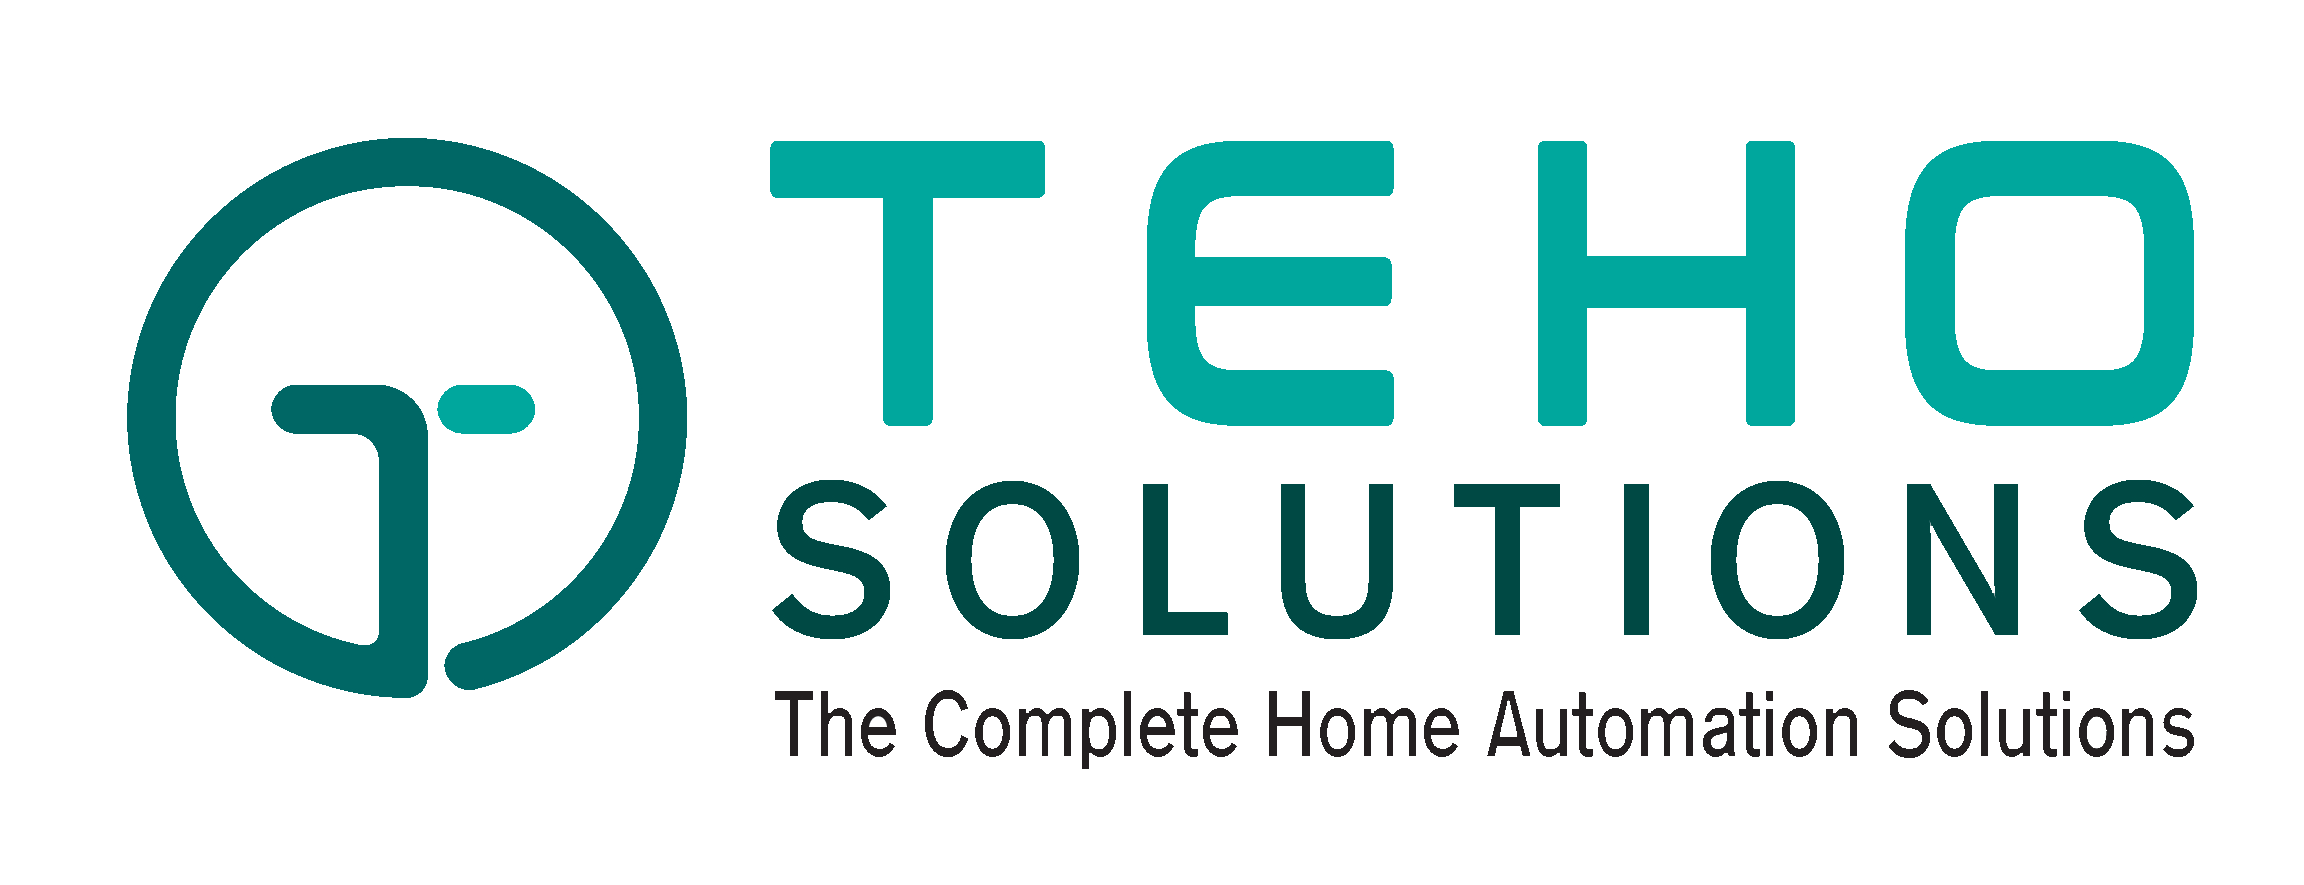 Best Home Automation Services in Kerala